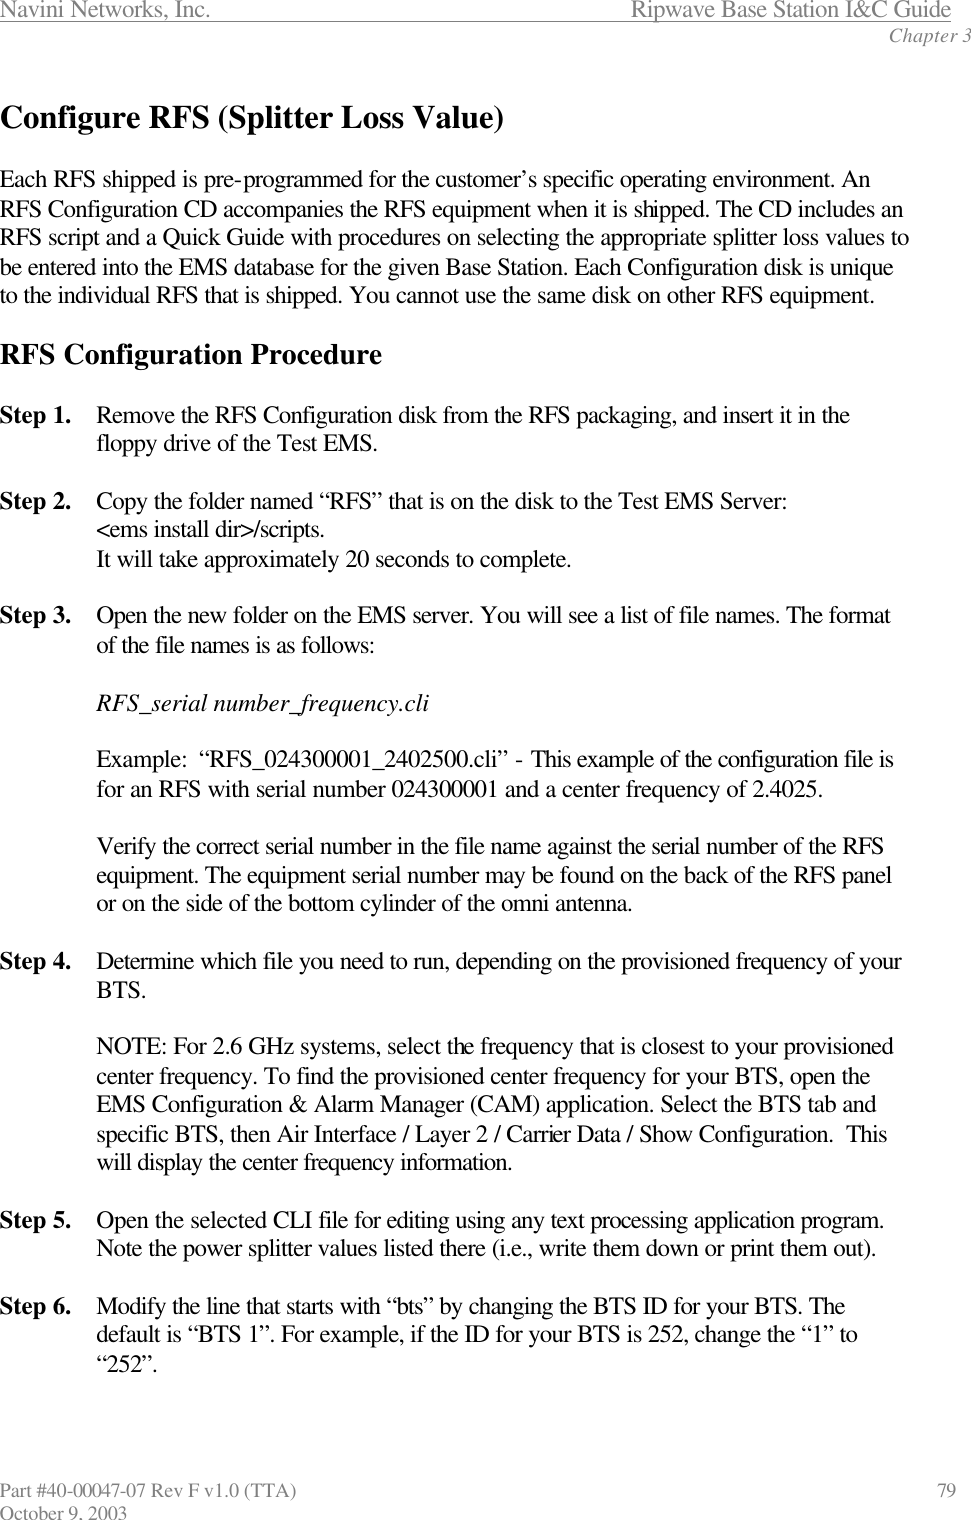 Navini Networks, Inc.                           Ripwave Base Station I&amp;C Guide Chapter 3 Part #40-00047-07 Rev F v1.0 (TTA)                             79 October 9, 2003  Configure RFS (Splitter Loss Value)  Each RFS shipped is pre-programmed for the customer’s specific operating environment. An RFS Configuration CD accompanies the RFS equipment when it is shipped. The CD includes an RFS script and a Quick Guide with procedures on selecting the appropriate splitter loss values to be entered into the EMS database for the given Base Station. Each Configuration disk is unique to the individual RFS that is shipped. You cannot use the same disk on other RFS equipment.  RFS Configuration Procedure  Step 1. Remove the RFS Configuration disk from the RFS packaging, and insert it in the floppy drive of the Test EMS.  Step 2. Copy the folder named “RFS” that is on the disk to the Test EMS Server:  &lt;ems install dir&gt;/scripts.  It will take approximately 20 seconds to complete.  Step 3. Open the new folder on the EMS server. You will see a list of file names. The format of the file names is as follows:  RFS_serial number_frequency.cli  Example:  “RFS_024300001_2402500.cli” - This example of the configuration file is for an RFS with serial number 024300001 and a center frequency of 2.4025.  Verify the correct serial number in the file name against the serial number of the RFS equipment. The equipment serial number may be found on the back of the RFS panel or on the side of the bottom cylinder of the omni antenna.  Step 4. Determine which file you need to run, depending on the provisioned frequency of your BTS.   NOTE: For 2.6 GHz systems, select the frequency that is closest to your provisioned center frequency. To find the provisioned center frequency for your BTS, open the EMS Configuration &amp; Alarm Manager (CAM) application. Select the BTS tab and specific BTS, then Air Interface / Layer 2 / Carrier Data / Show Configuration.  This will display the center frequency information.  Step 5. Open the selected CLI file for editing using any text processing application program. Note the power splitter values listed there (i.e., write them down or print them out).  Step 6. Modify the line that starts with “bts” by changing the BTS ID for your BTS. The default is “BTS 1”. For example, if the ID for your BTS is 252, change the “1” to “252”.  